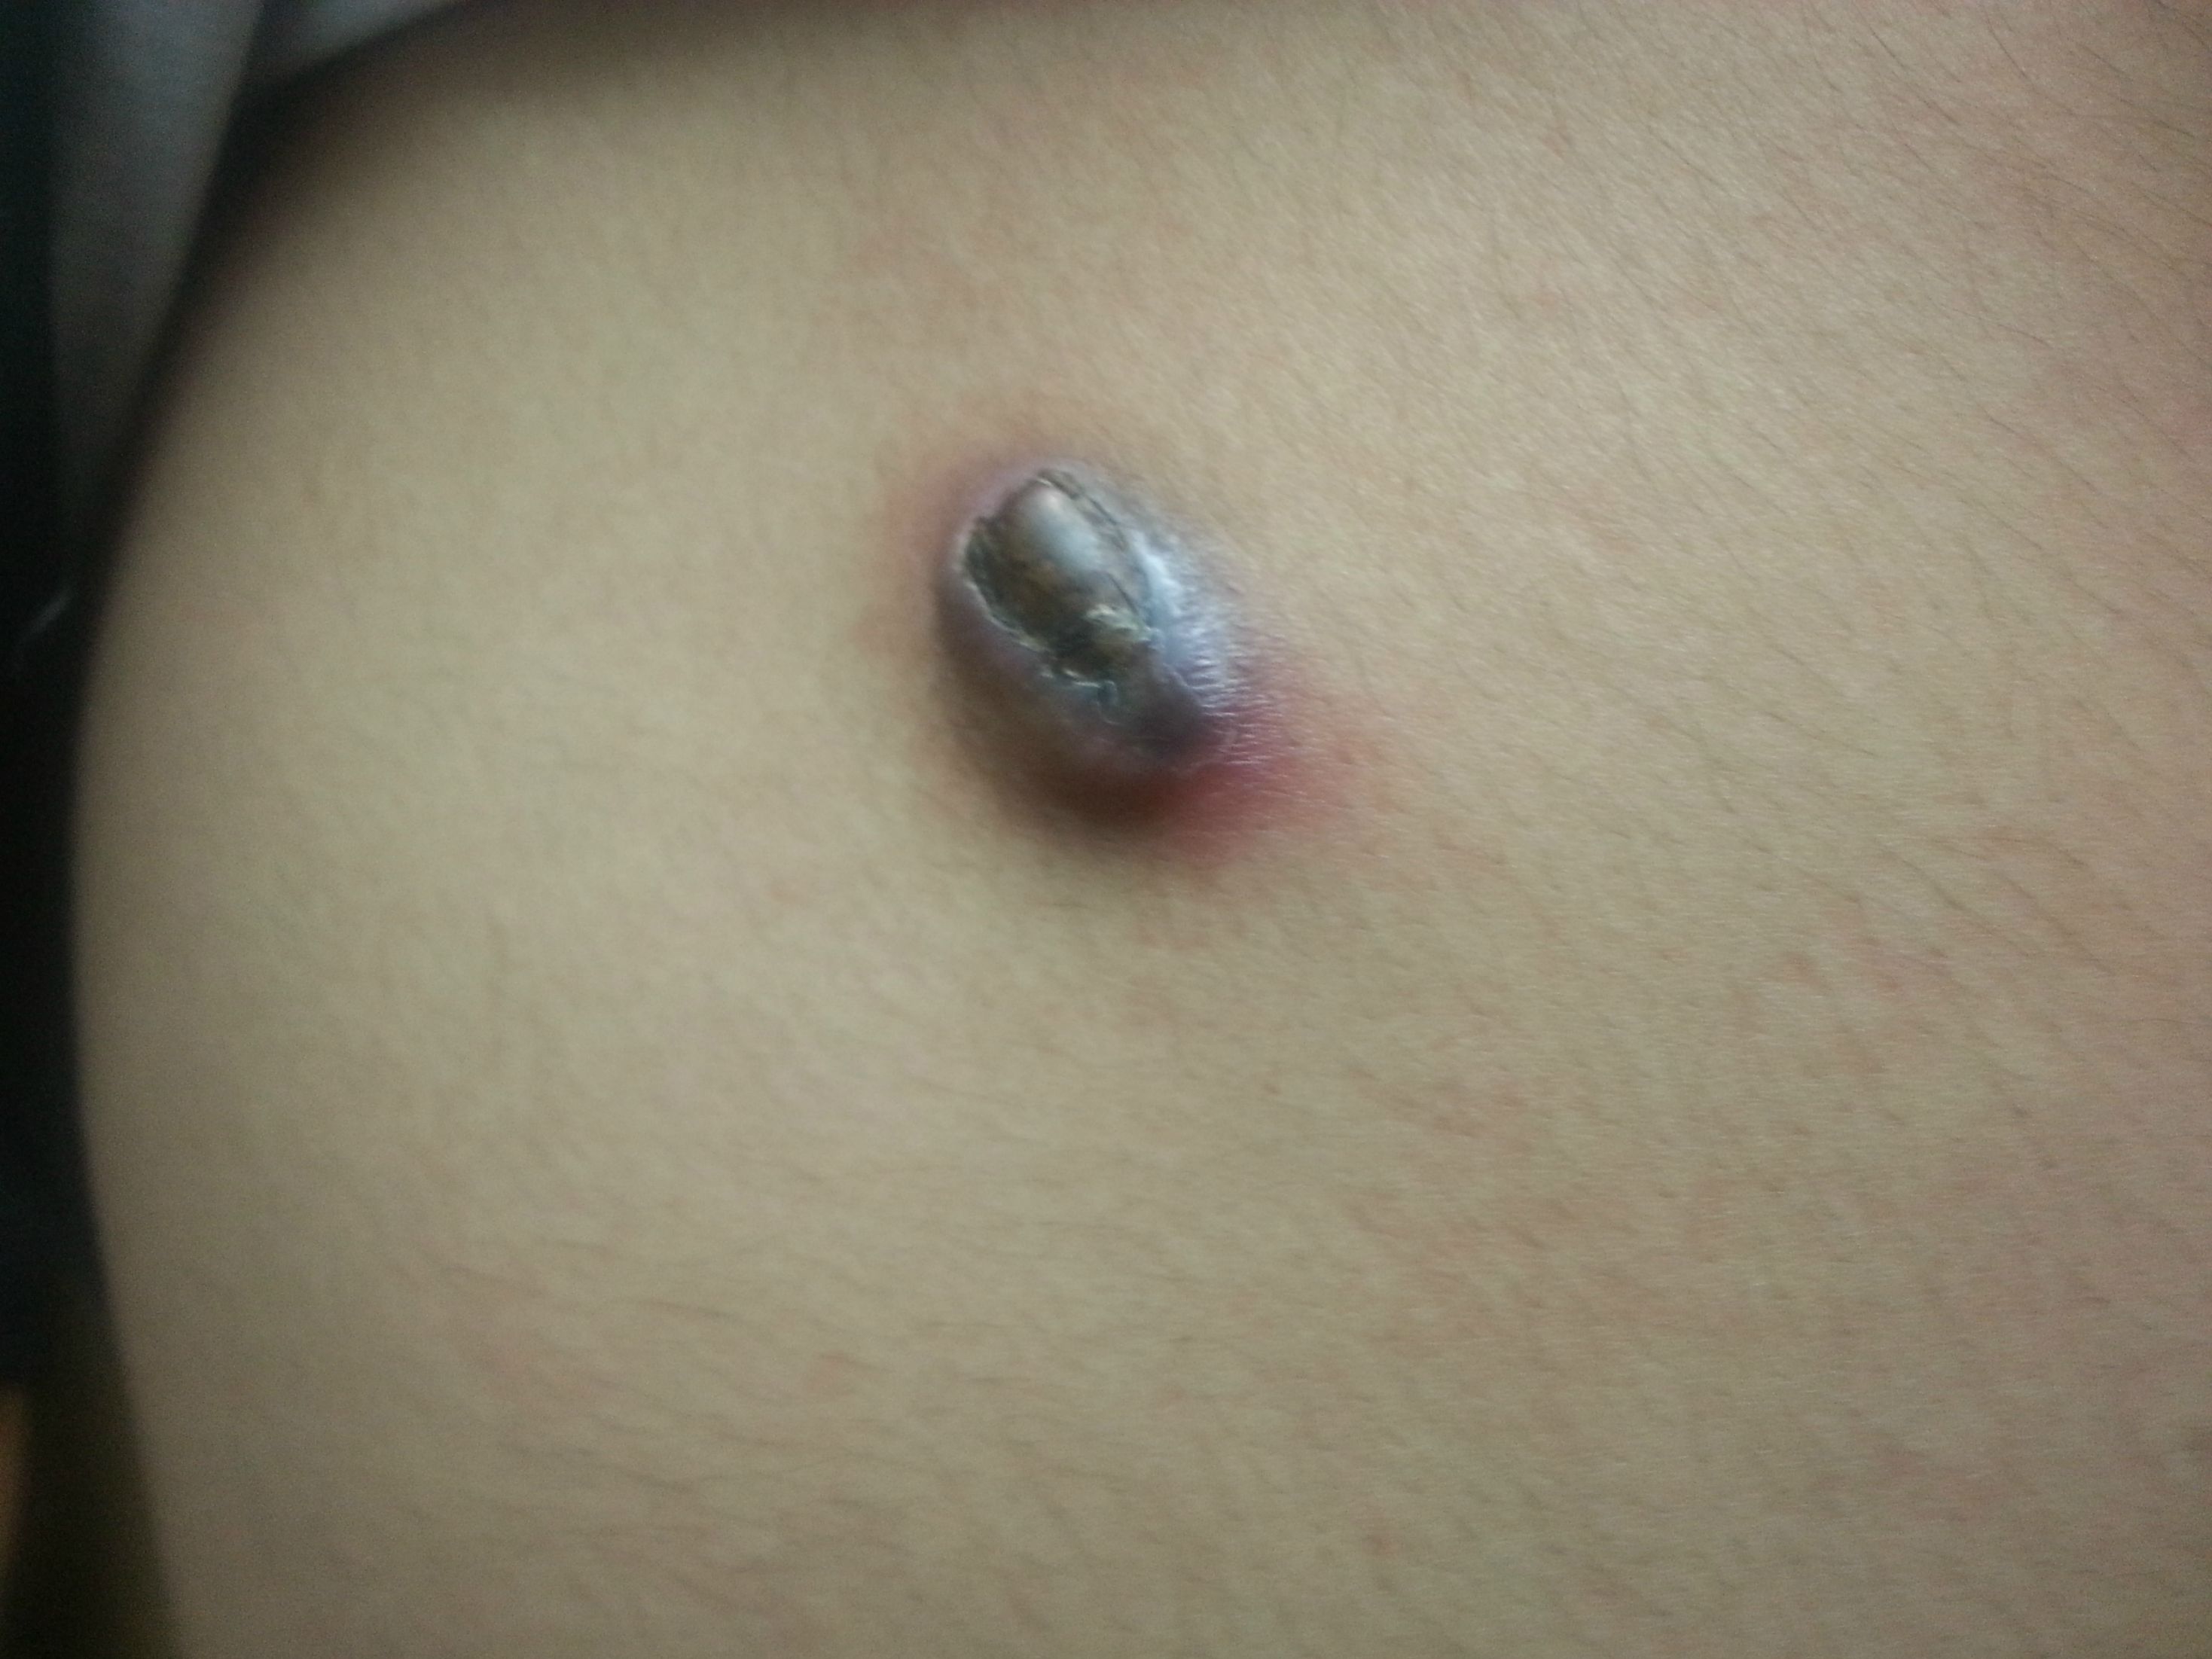 2 years of untreated bullet wound later